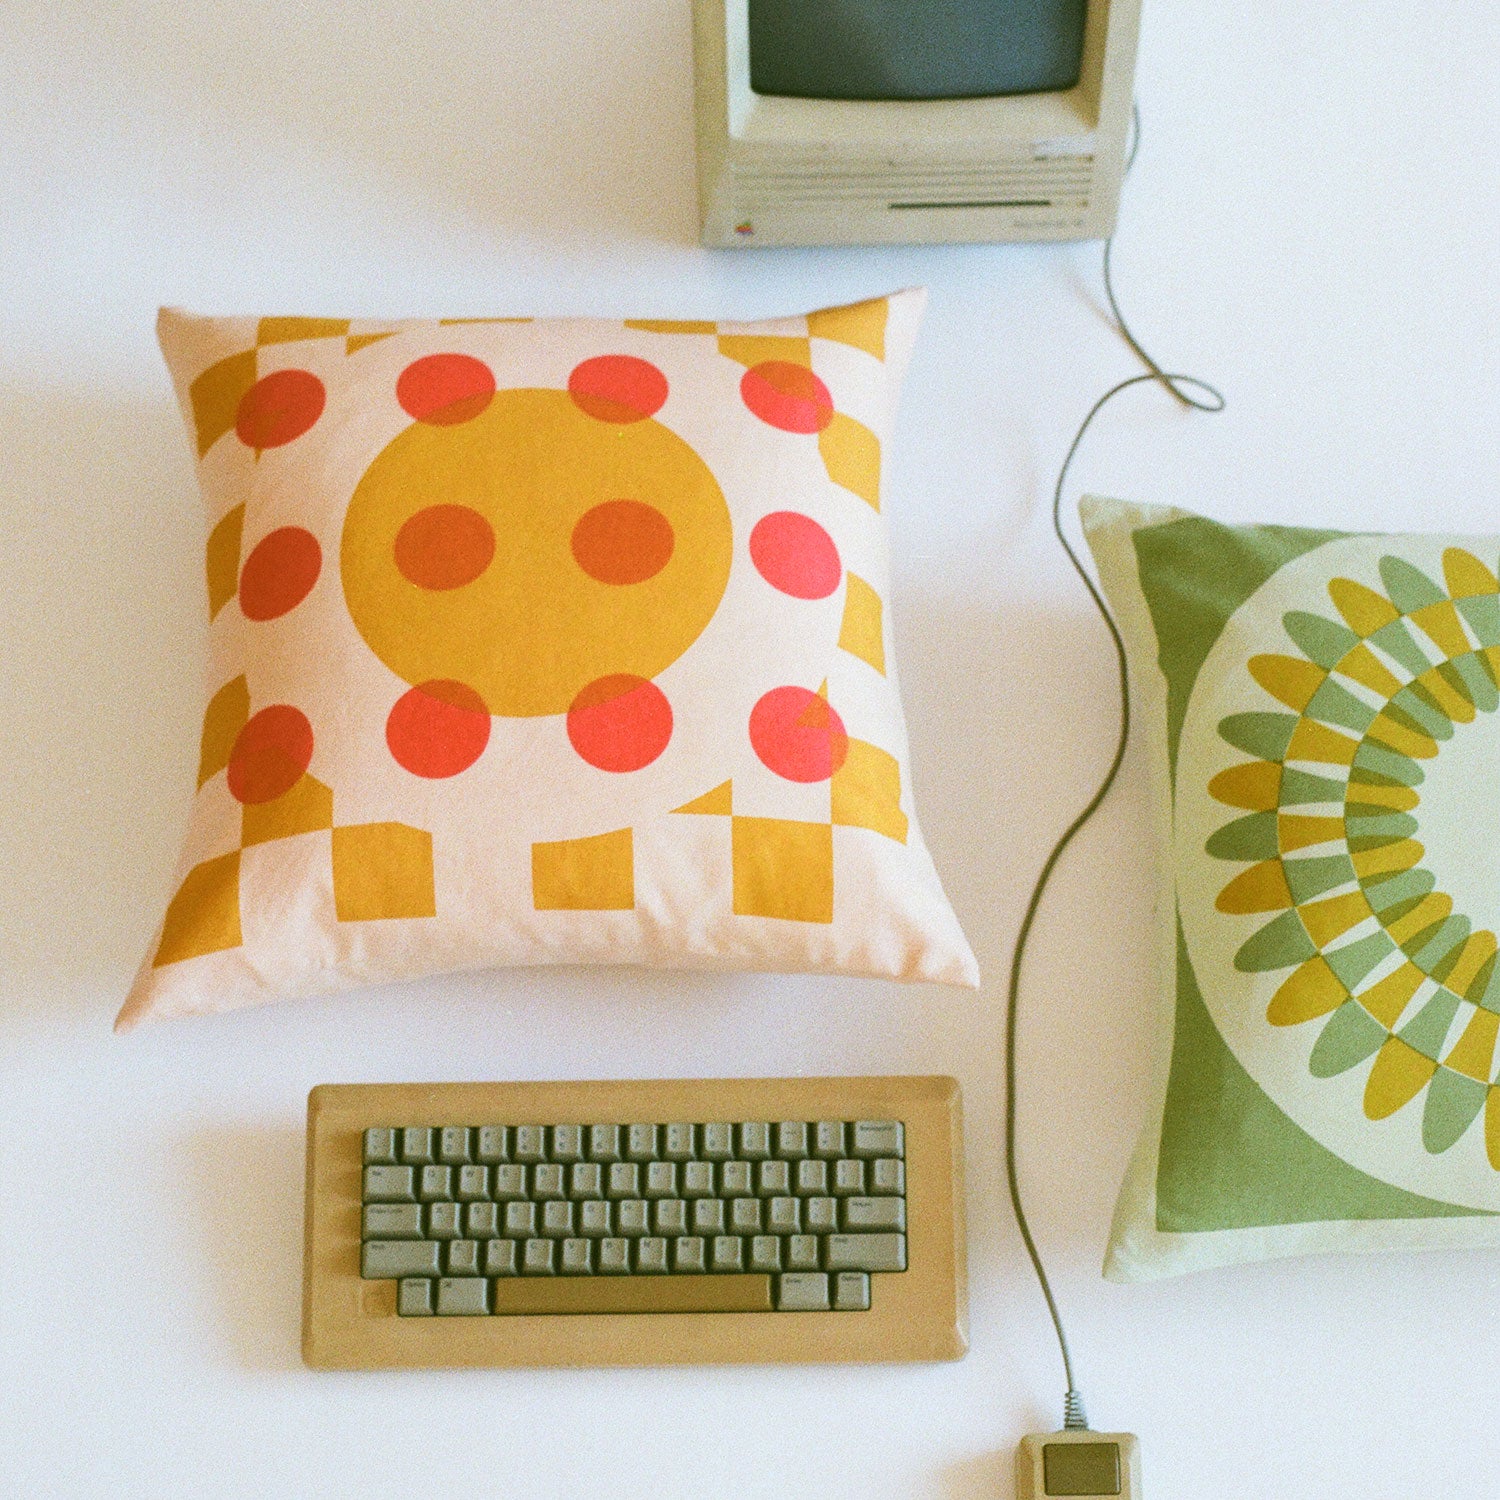 The Keyboard Pillow Cover in Peach Cranberry